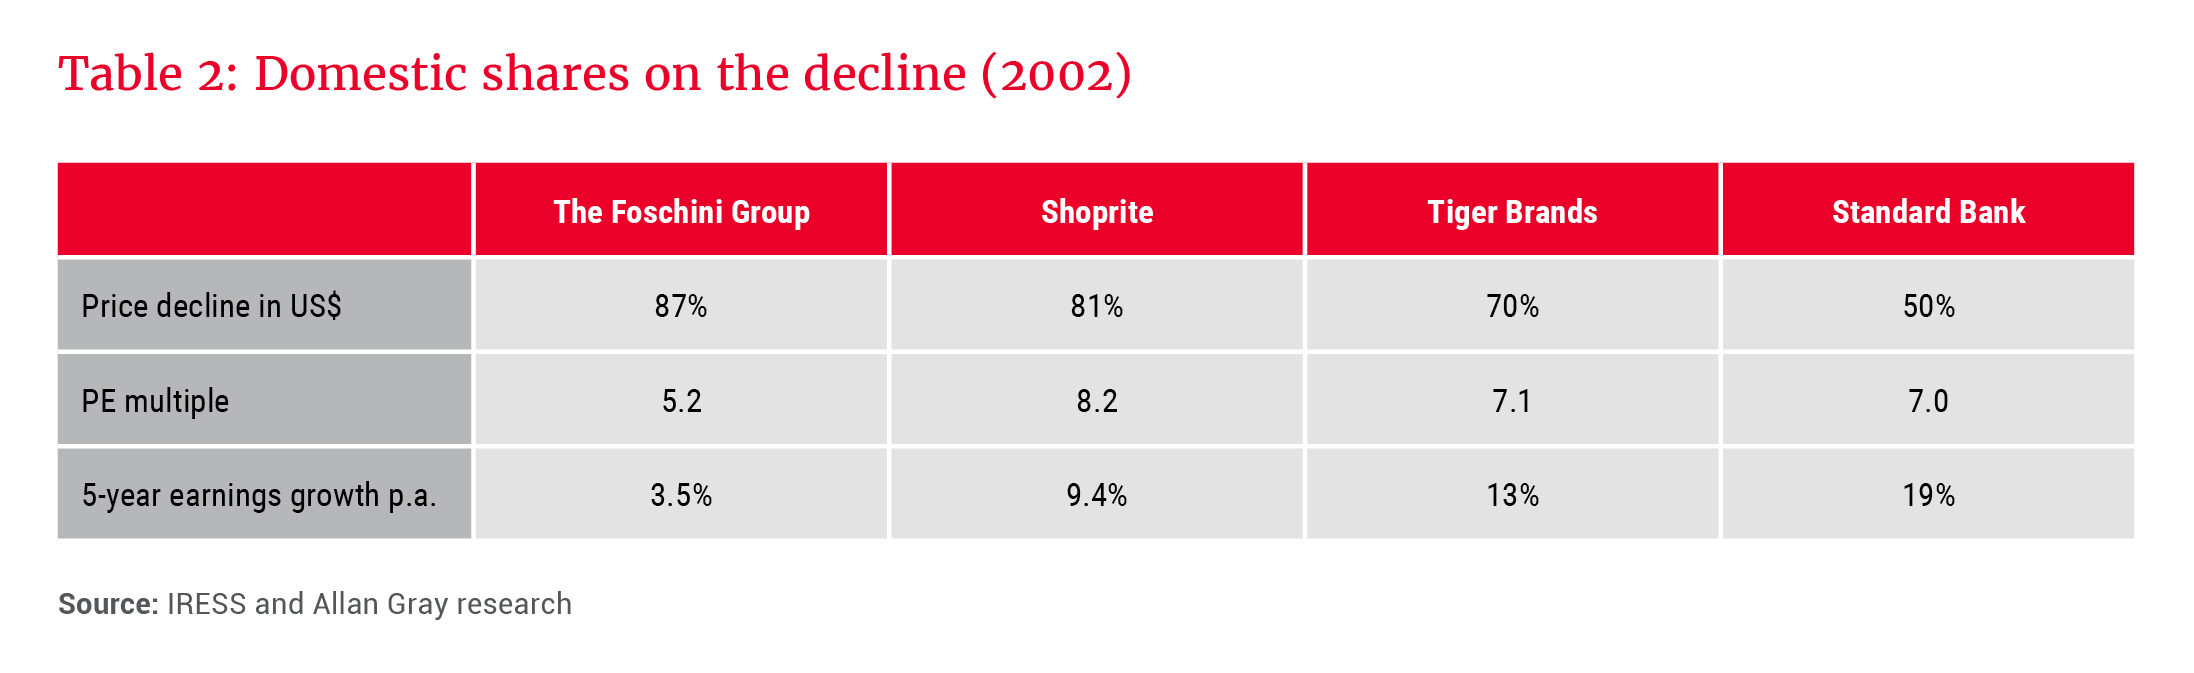 Domestic shares on the decline (2002) - Allan Gray